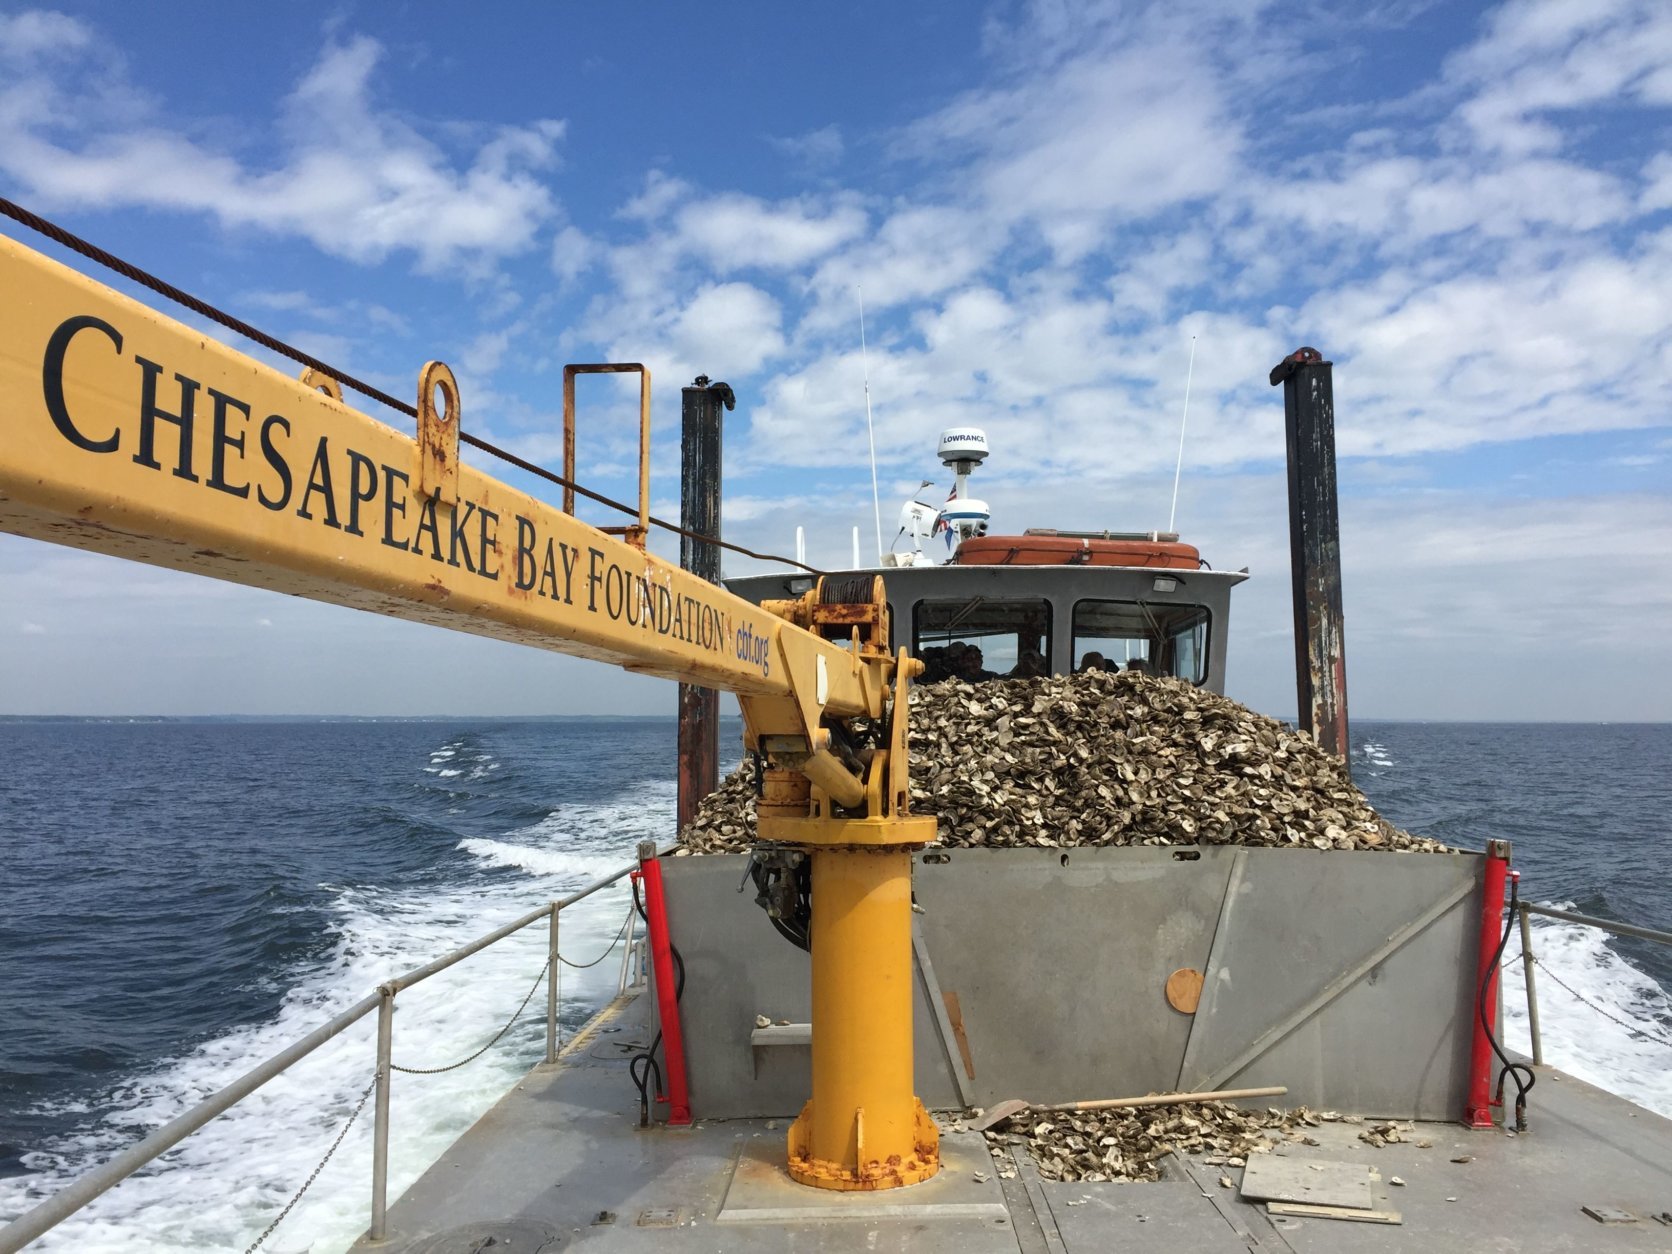 The Chesapeake Bay Foundation’s oyster-planting vessel The Patricia Campbell plants 4 million oysters in the Little Choptank River Sanctuary on Maryland’s Eastern Shore in this 2016 photo. (Courtesy, Chesapeake Bay Foundation/Emmy Nicklin)